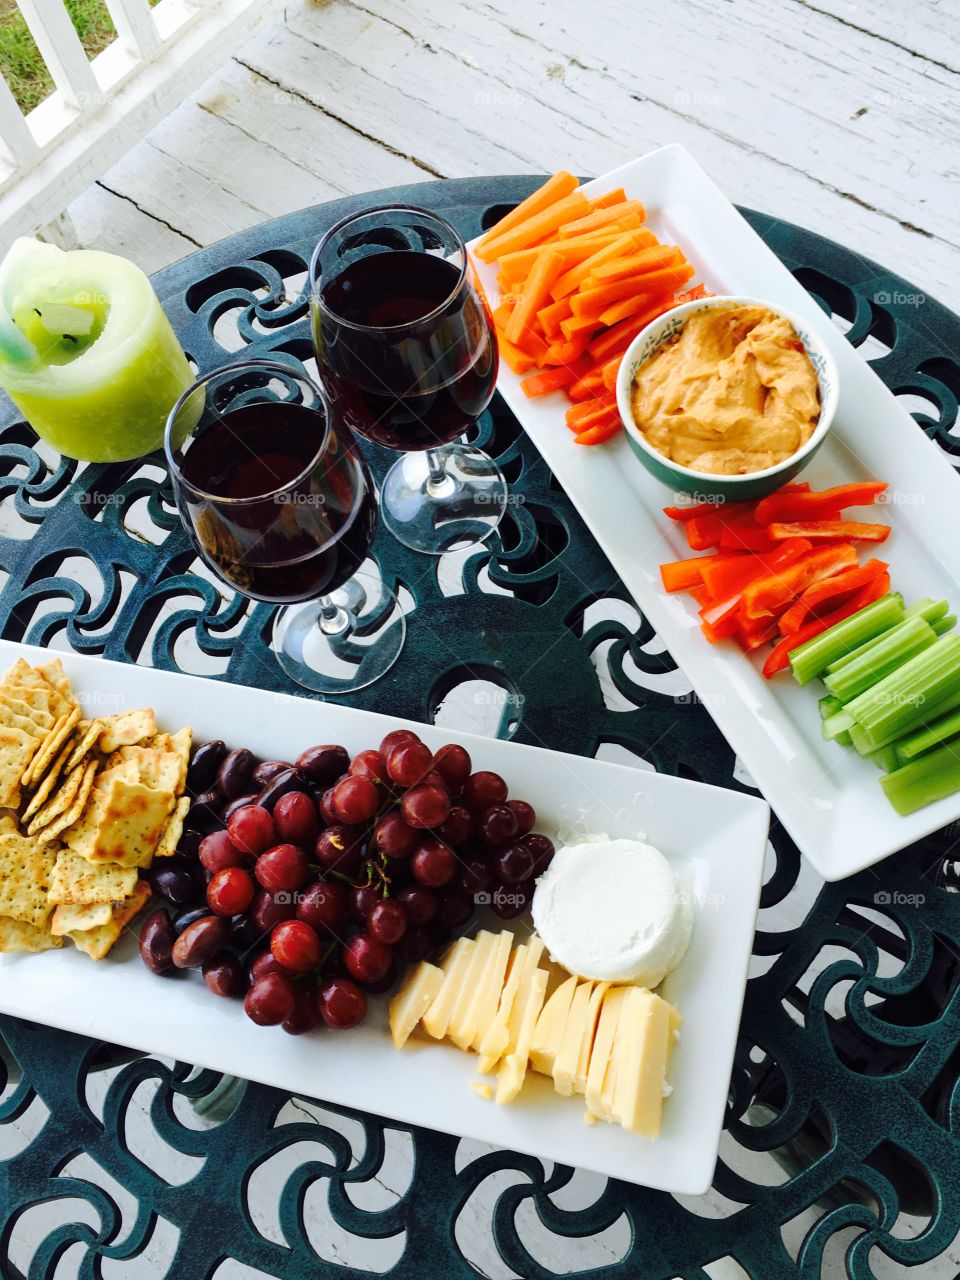 Through together a snack platter party